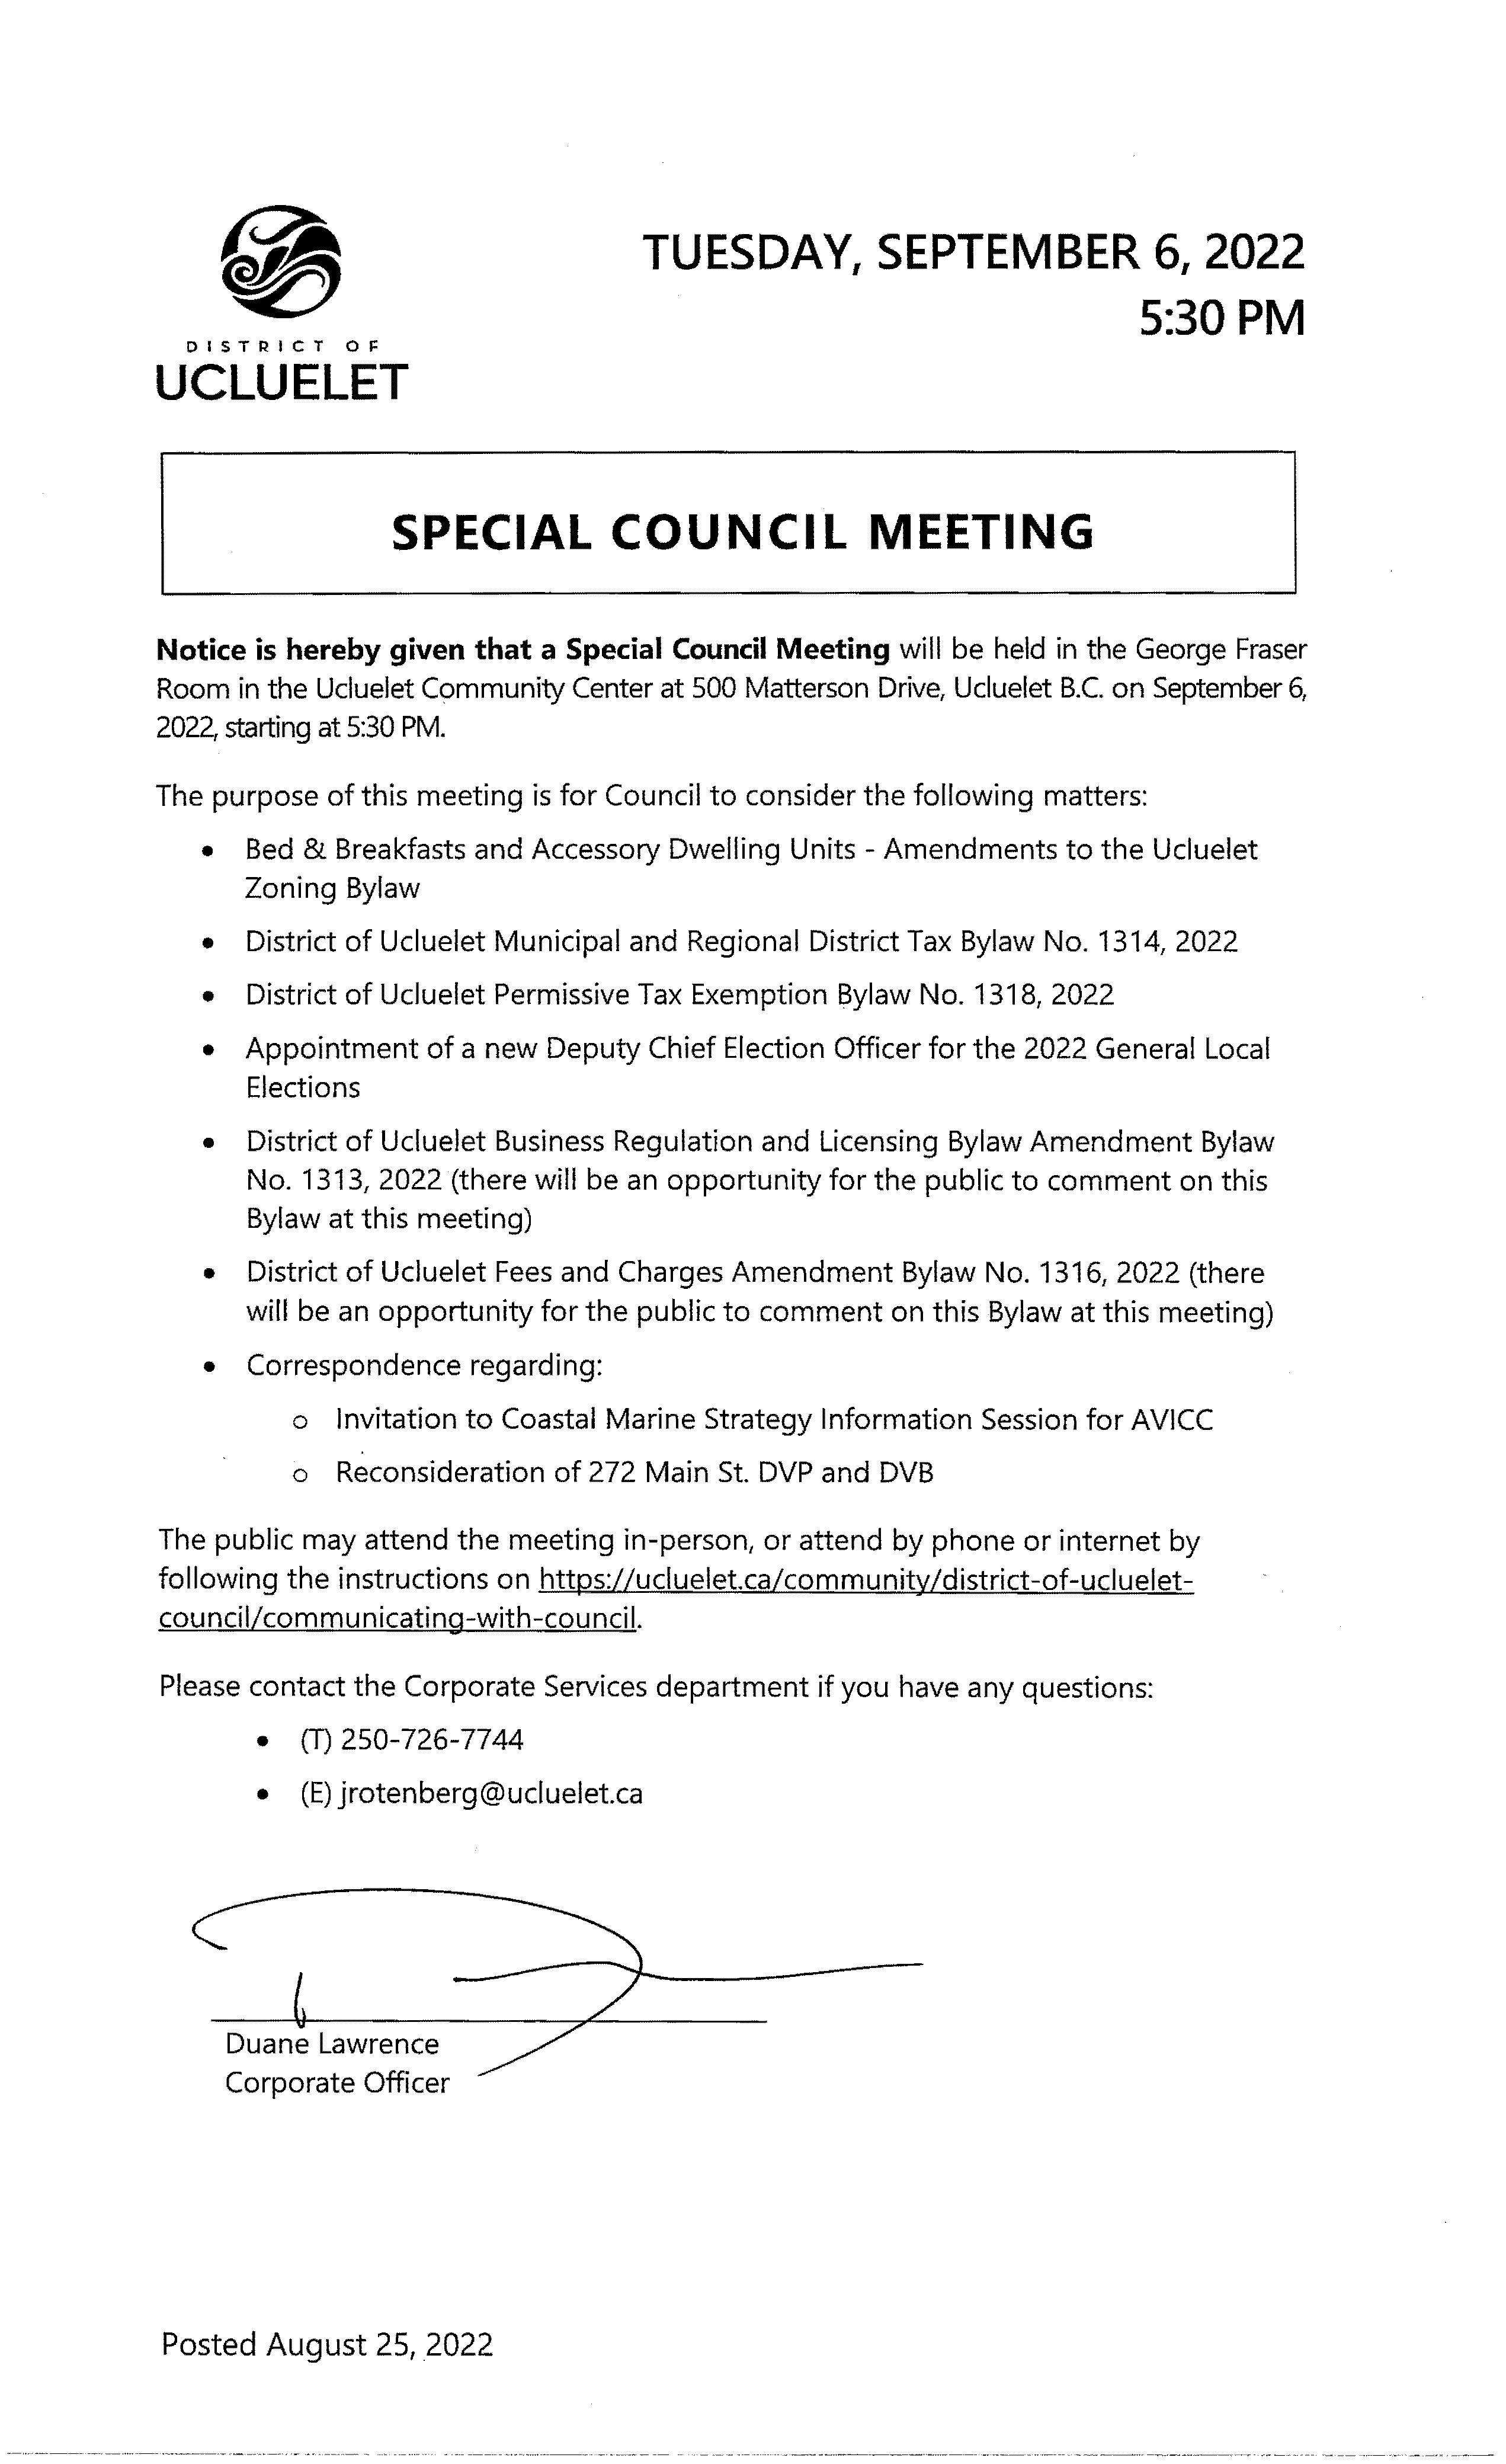 2022-09-06_Special_Meeting_Notice.png